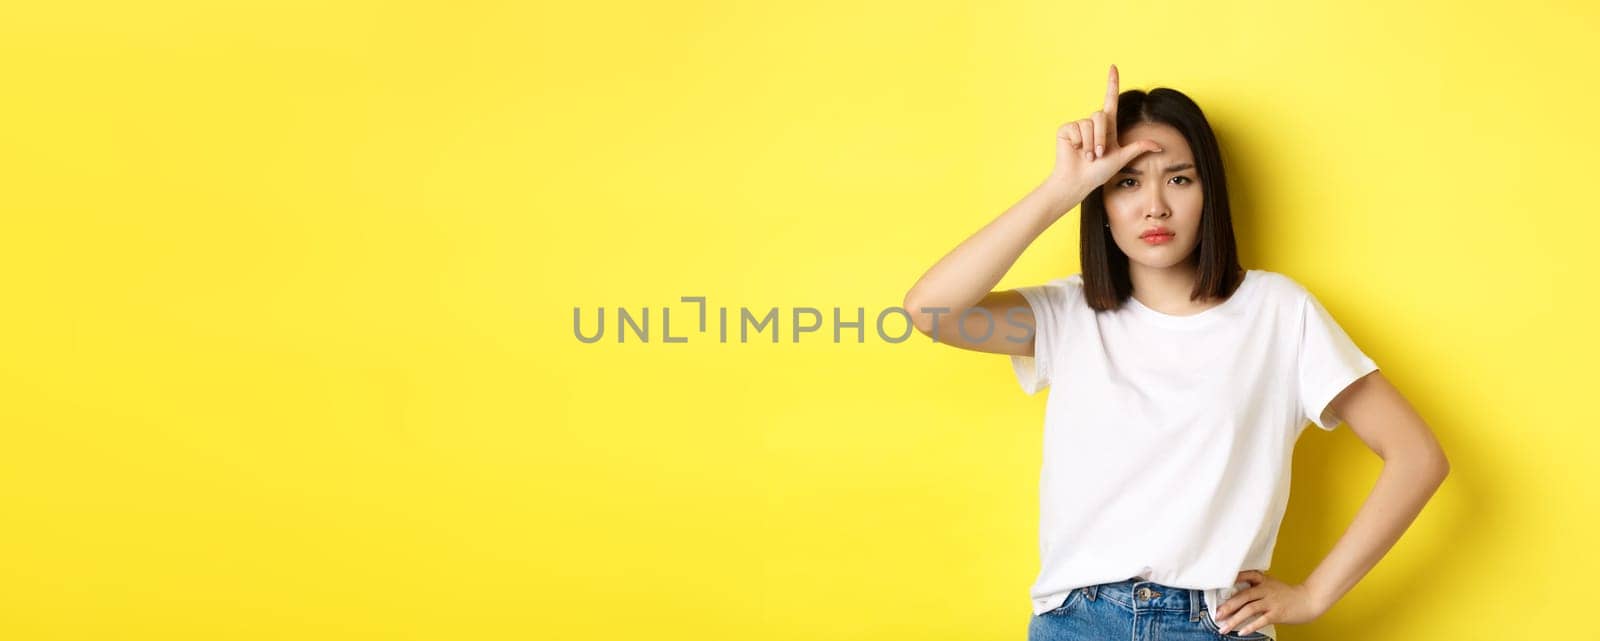 Serious and arrogant asian woman mocking lost team, showing loser sign on forehead and stare at camera confident, standing over yellow background.